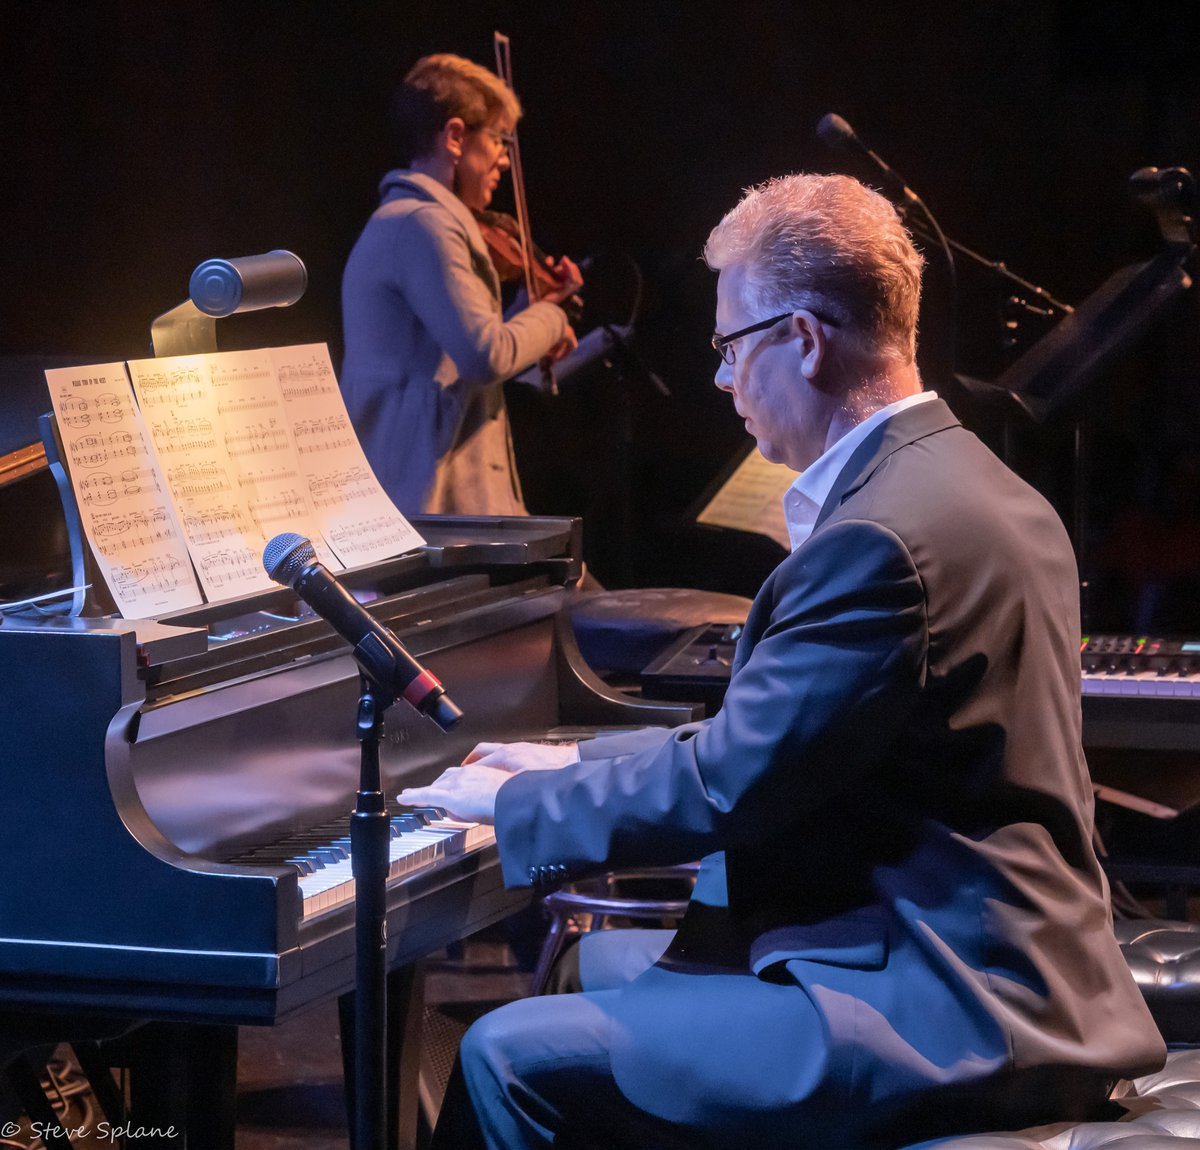 Performing my composition 'Please Turn Up The Quiet' with GRAMMY nominee @SaraCaswellVLN at the @PalladiumSPC in St. Pete, FL last Sunday. Opening for Chuck Owen's new band. A joy to be in the same company as these folks. @cl_tampabay @TheArtsatUSF @JazzCompPresent @isjac_org